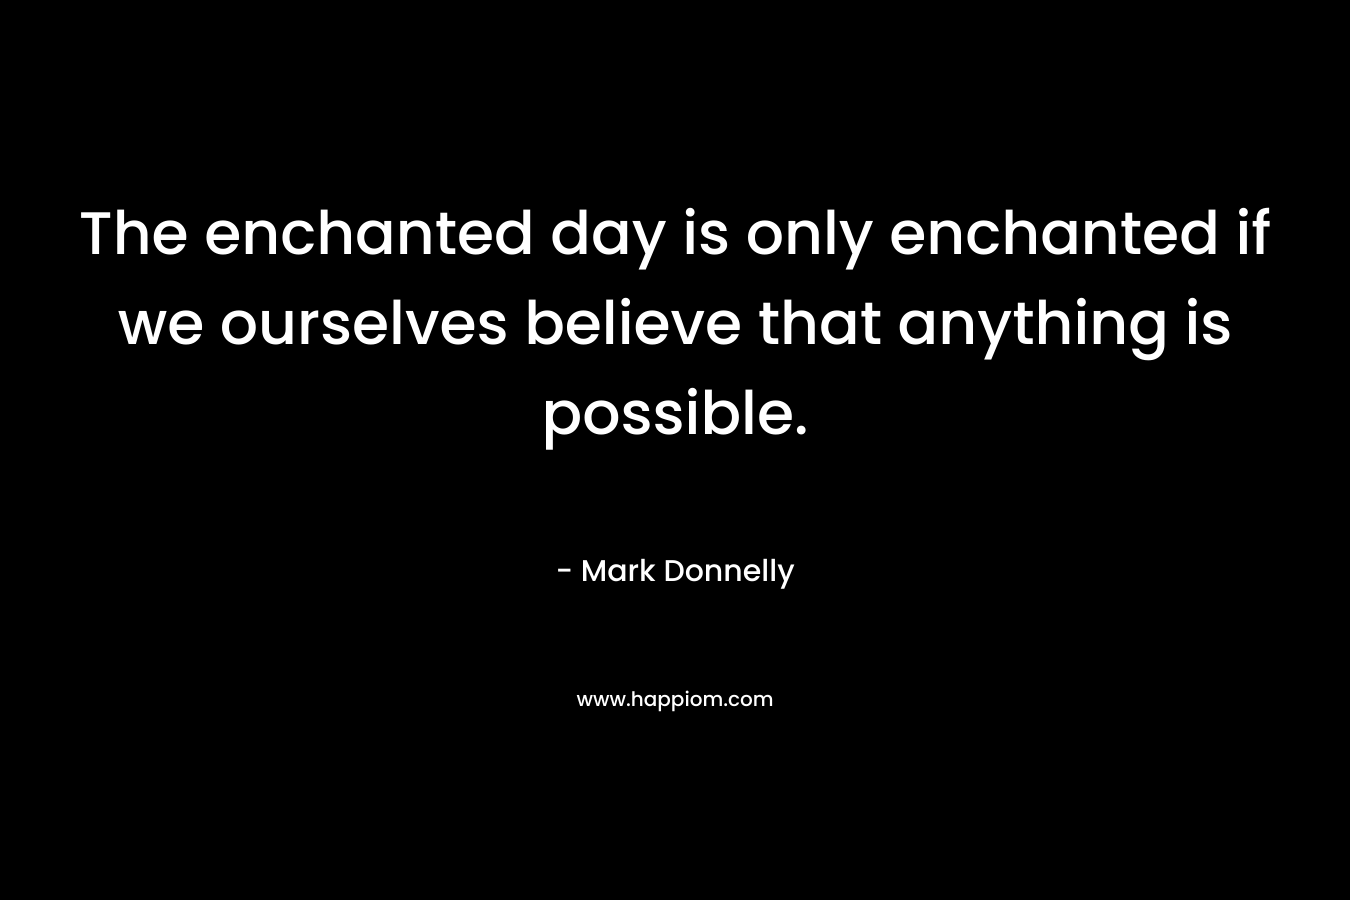 The enchanted day is only enchanted if we ourselves believe that anything is possible.